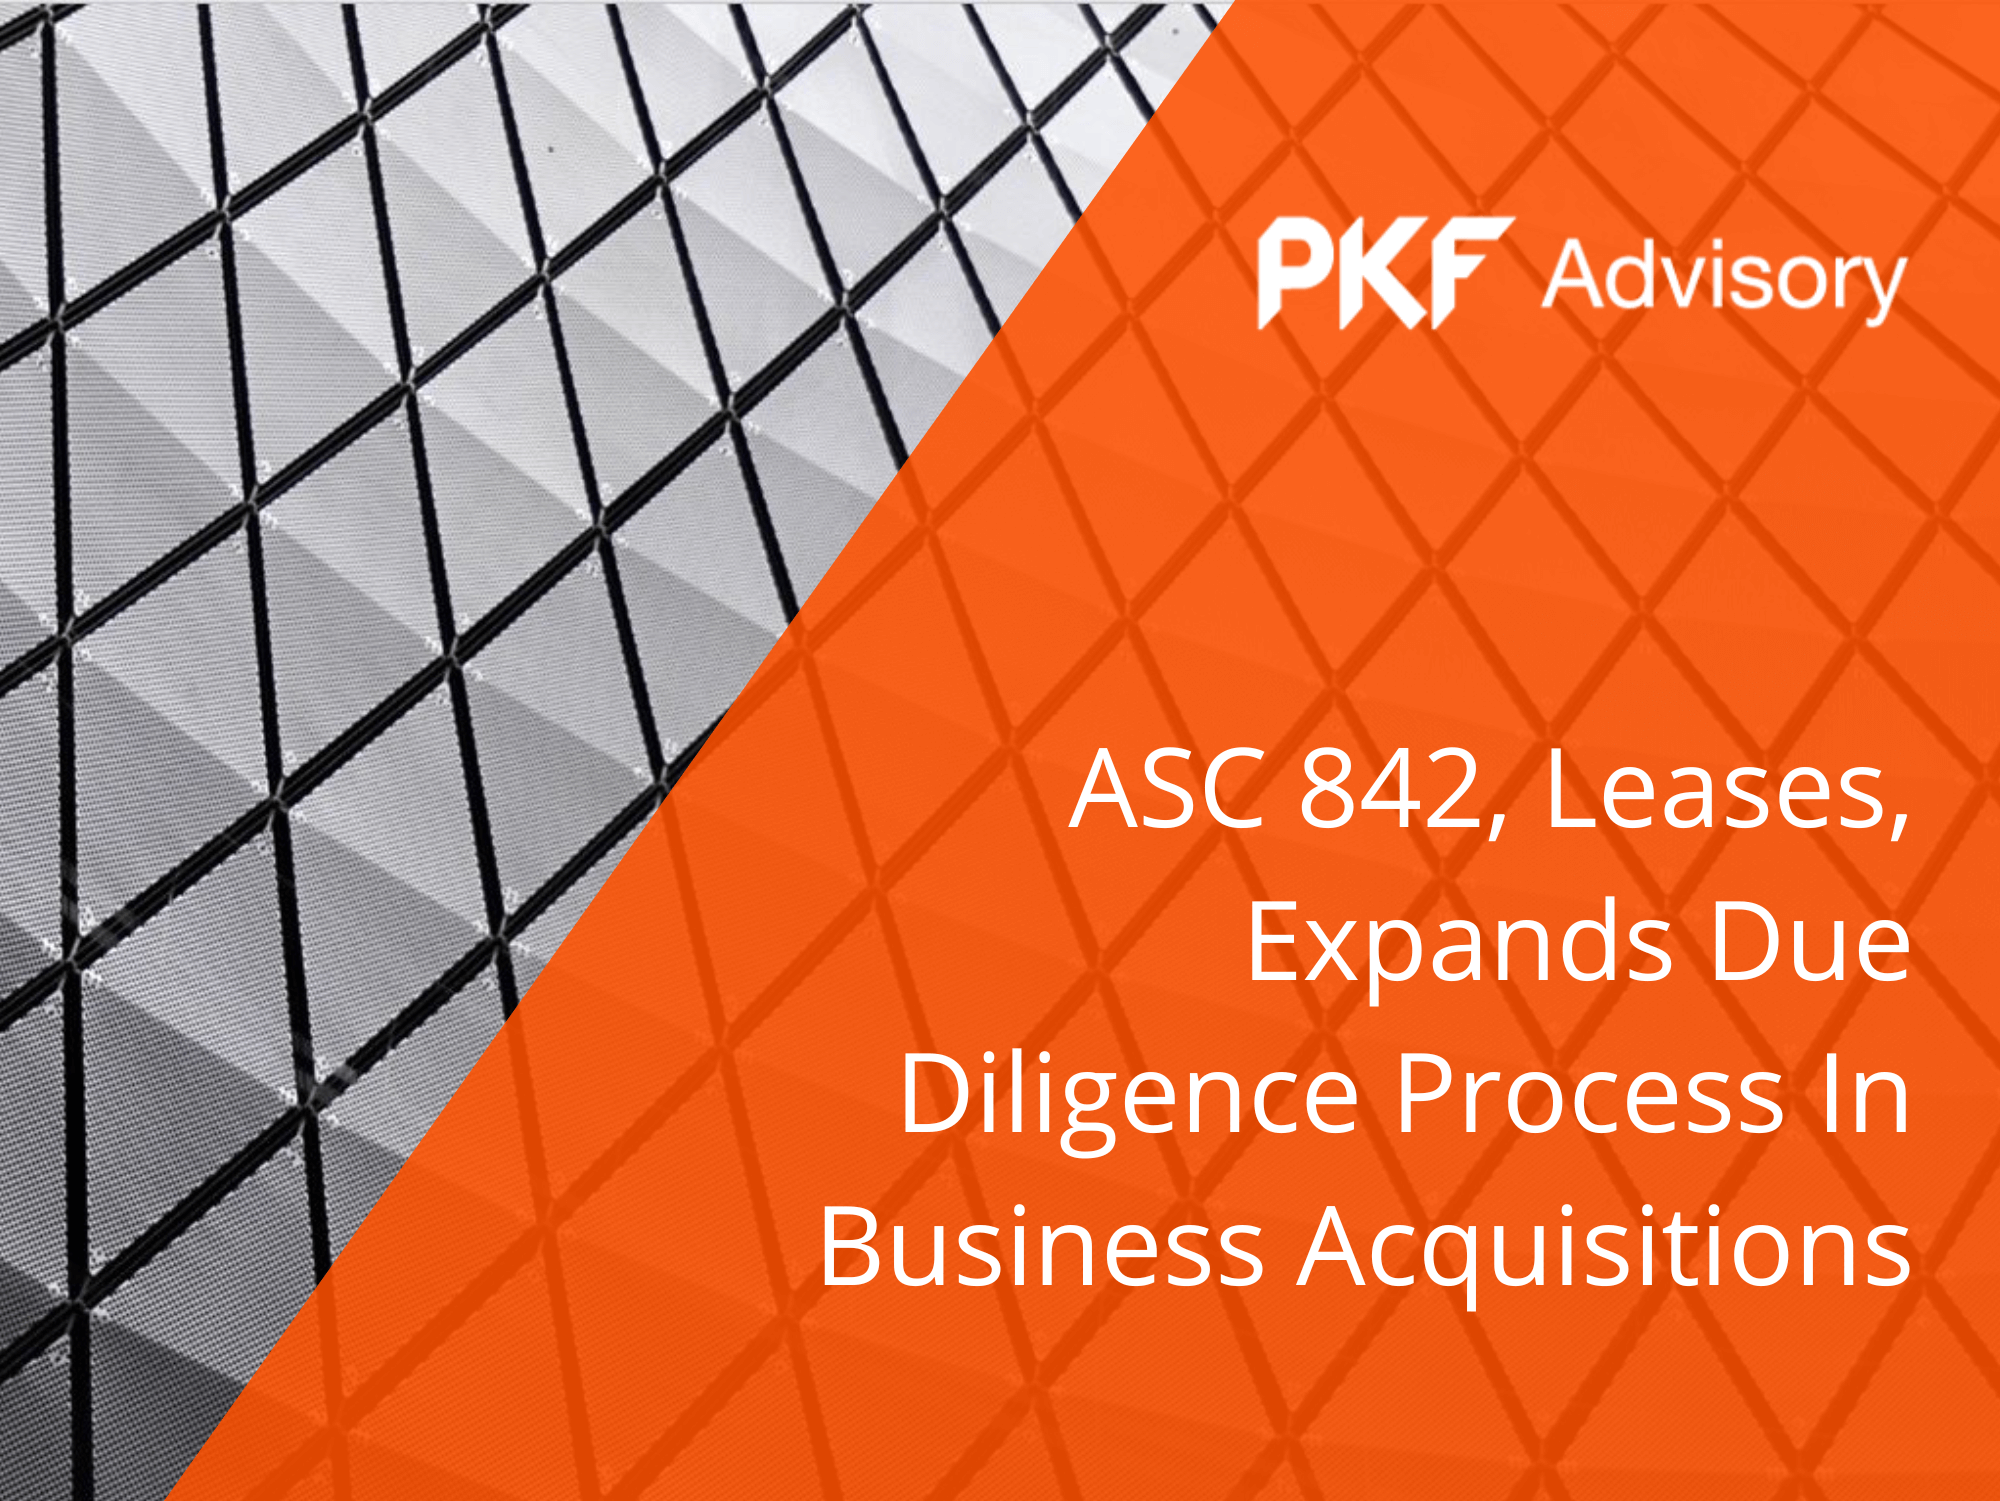 ASC 842 Leases, Expands Due Diligence Process in Business Acquisitions